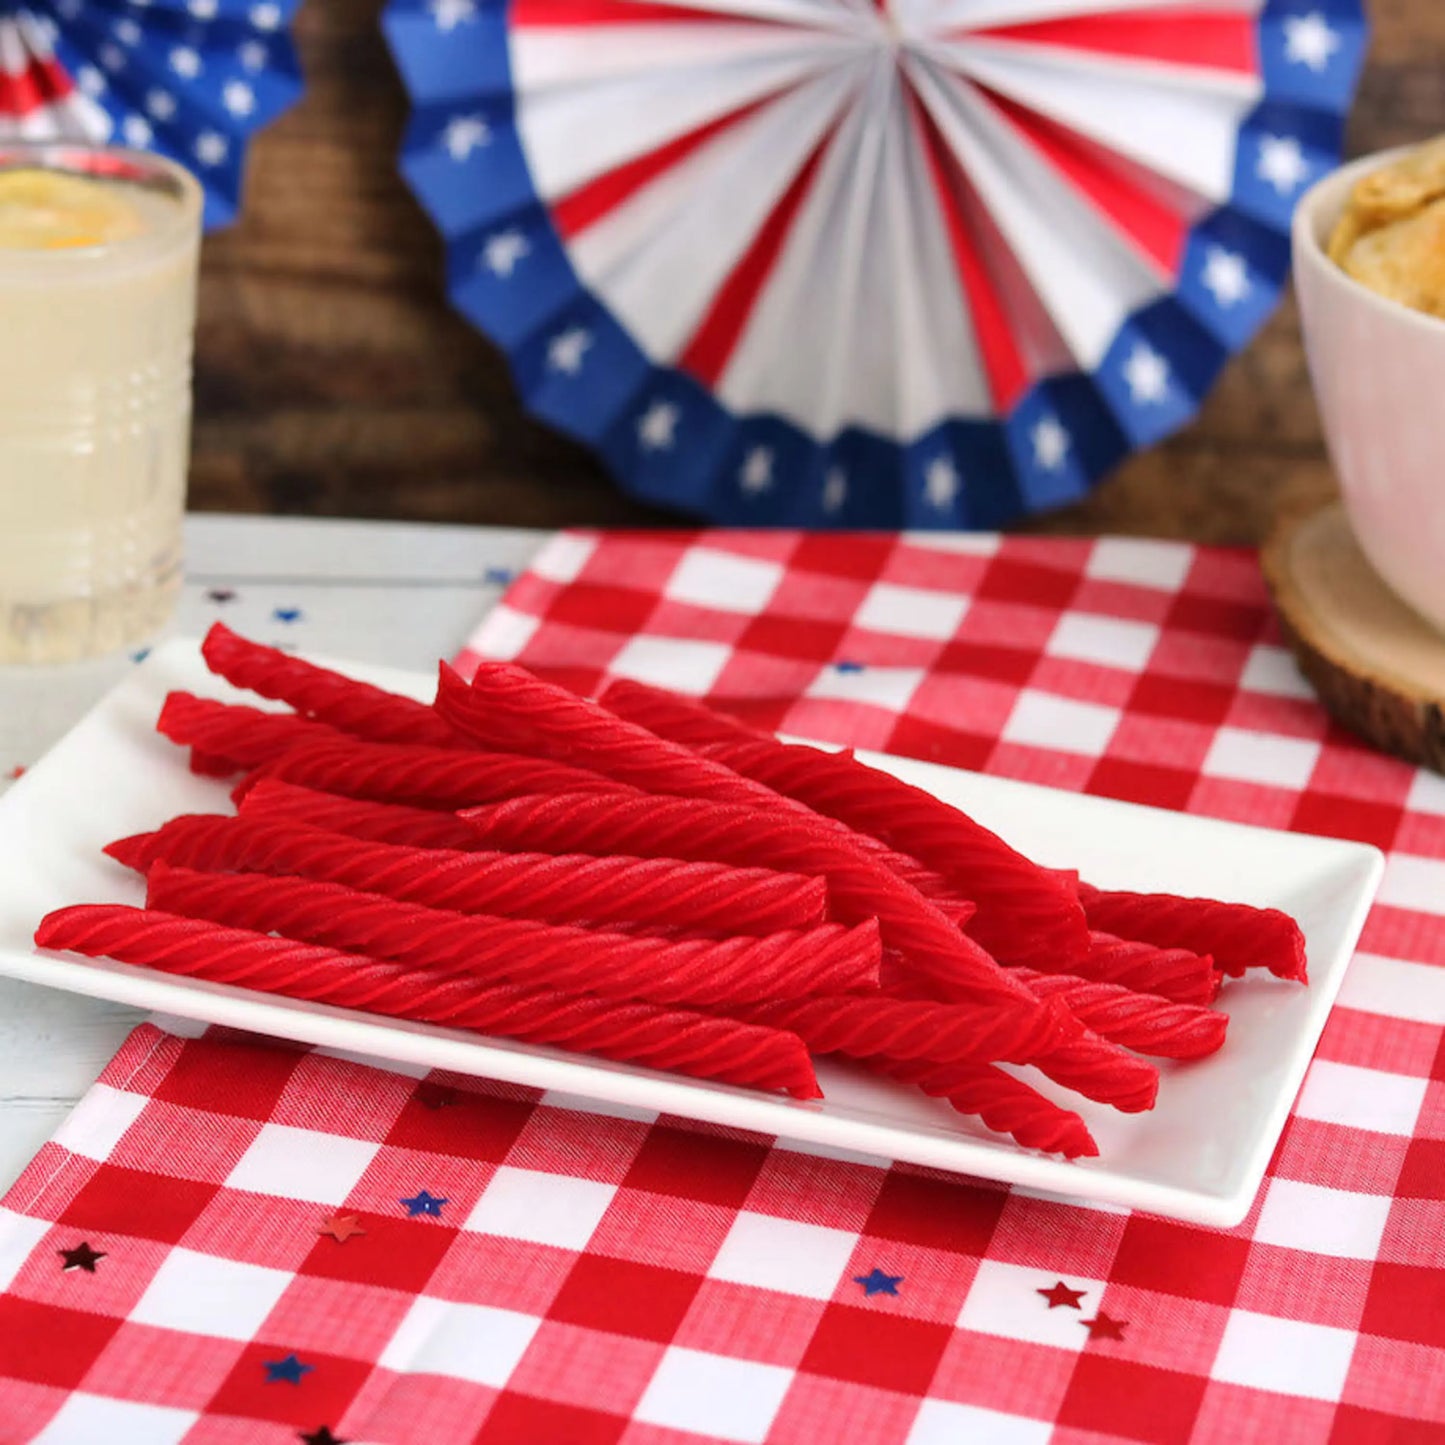 Red Vines Original Red Licorice Twists on a picnic table with patriotic decorations